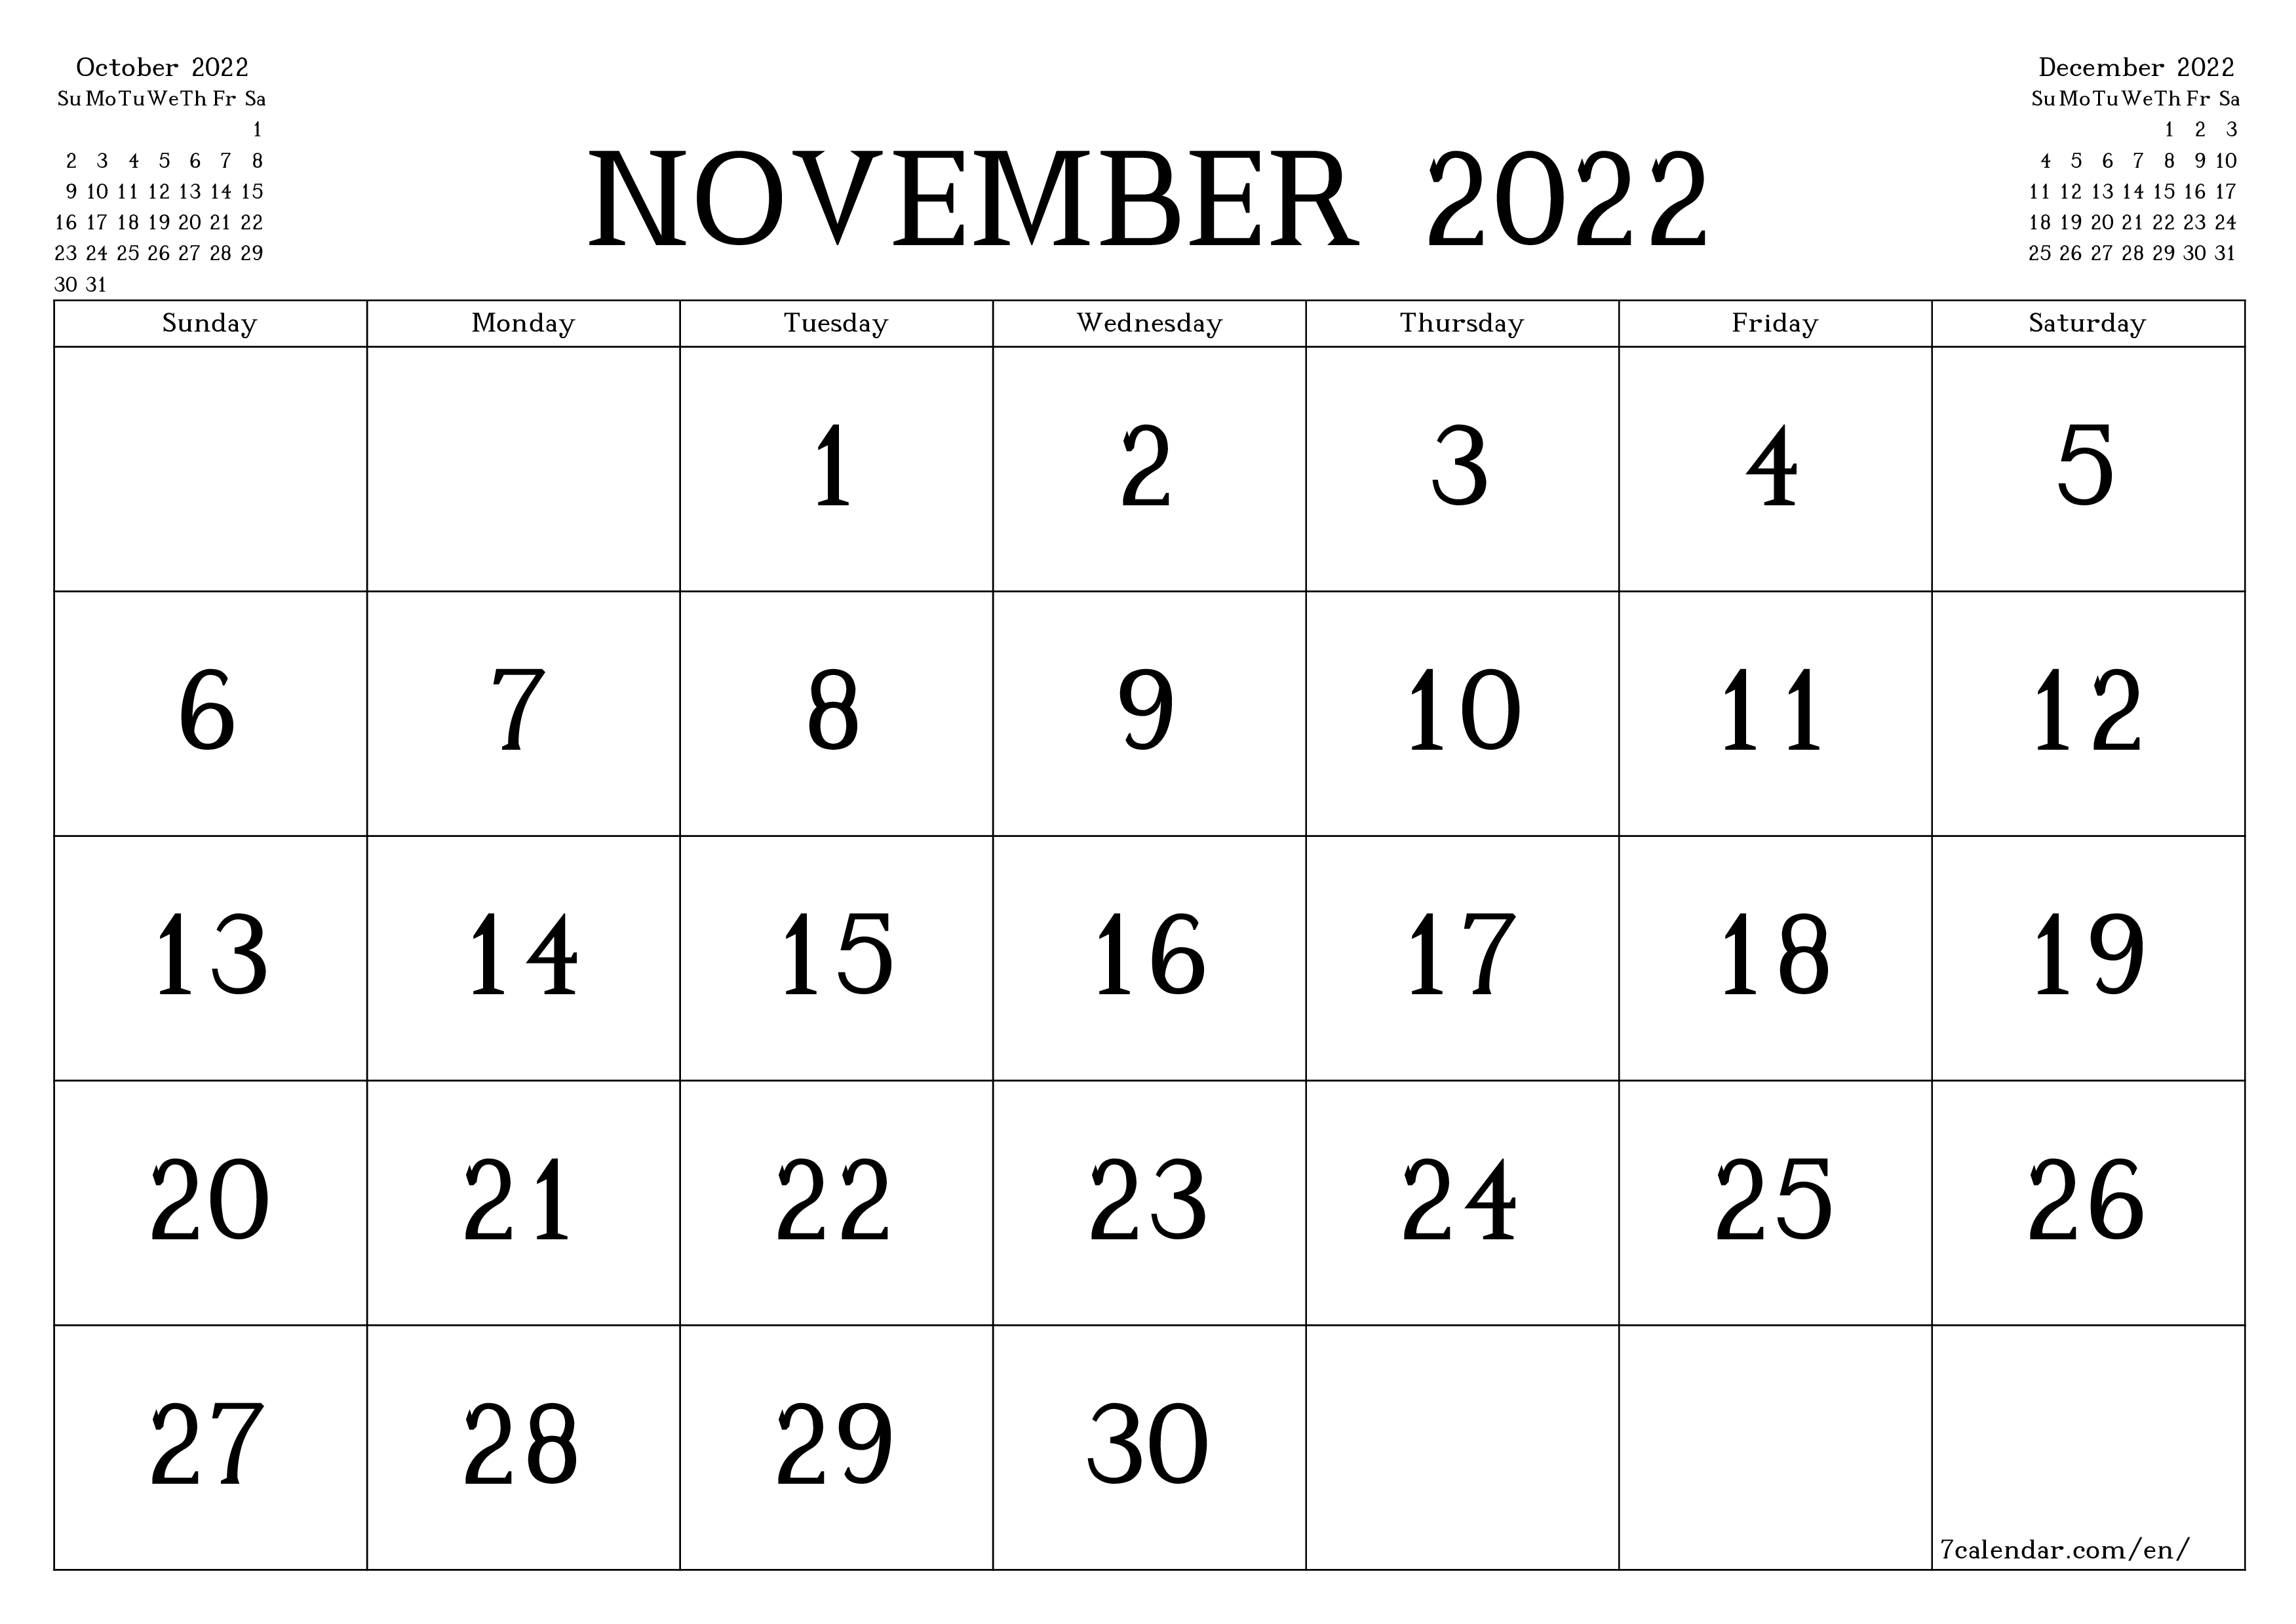 Monthly Calendar November 2022 November 2022 Printable Calendars And Planners, Pdf Templates For  Goodnotes, Notability, Remarkable - 7Calendar